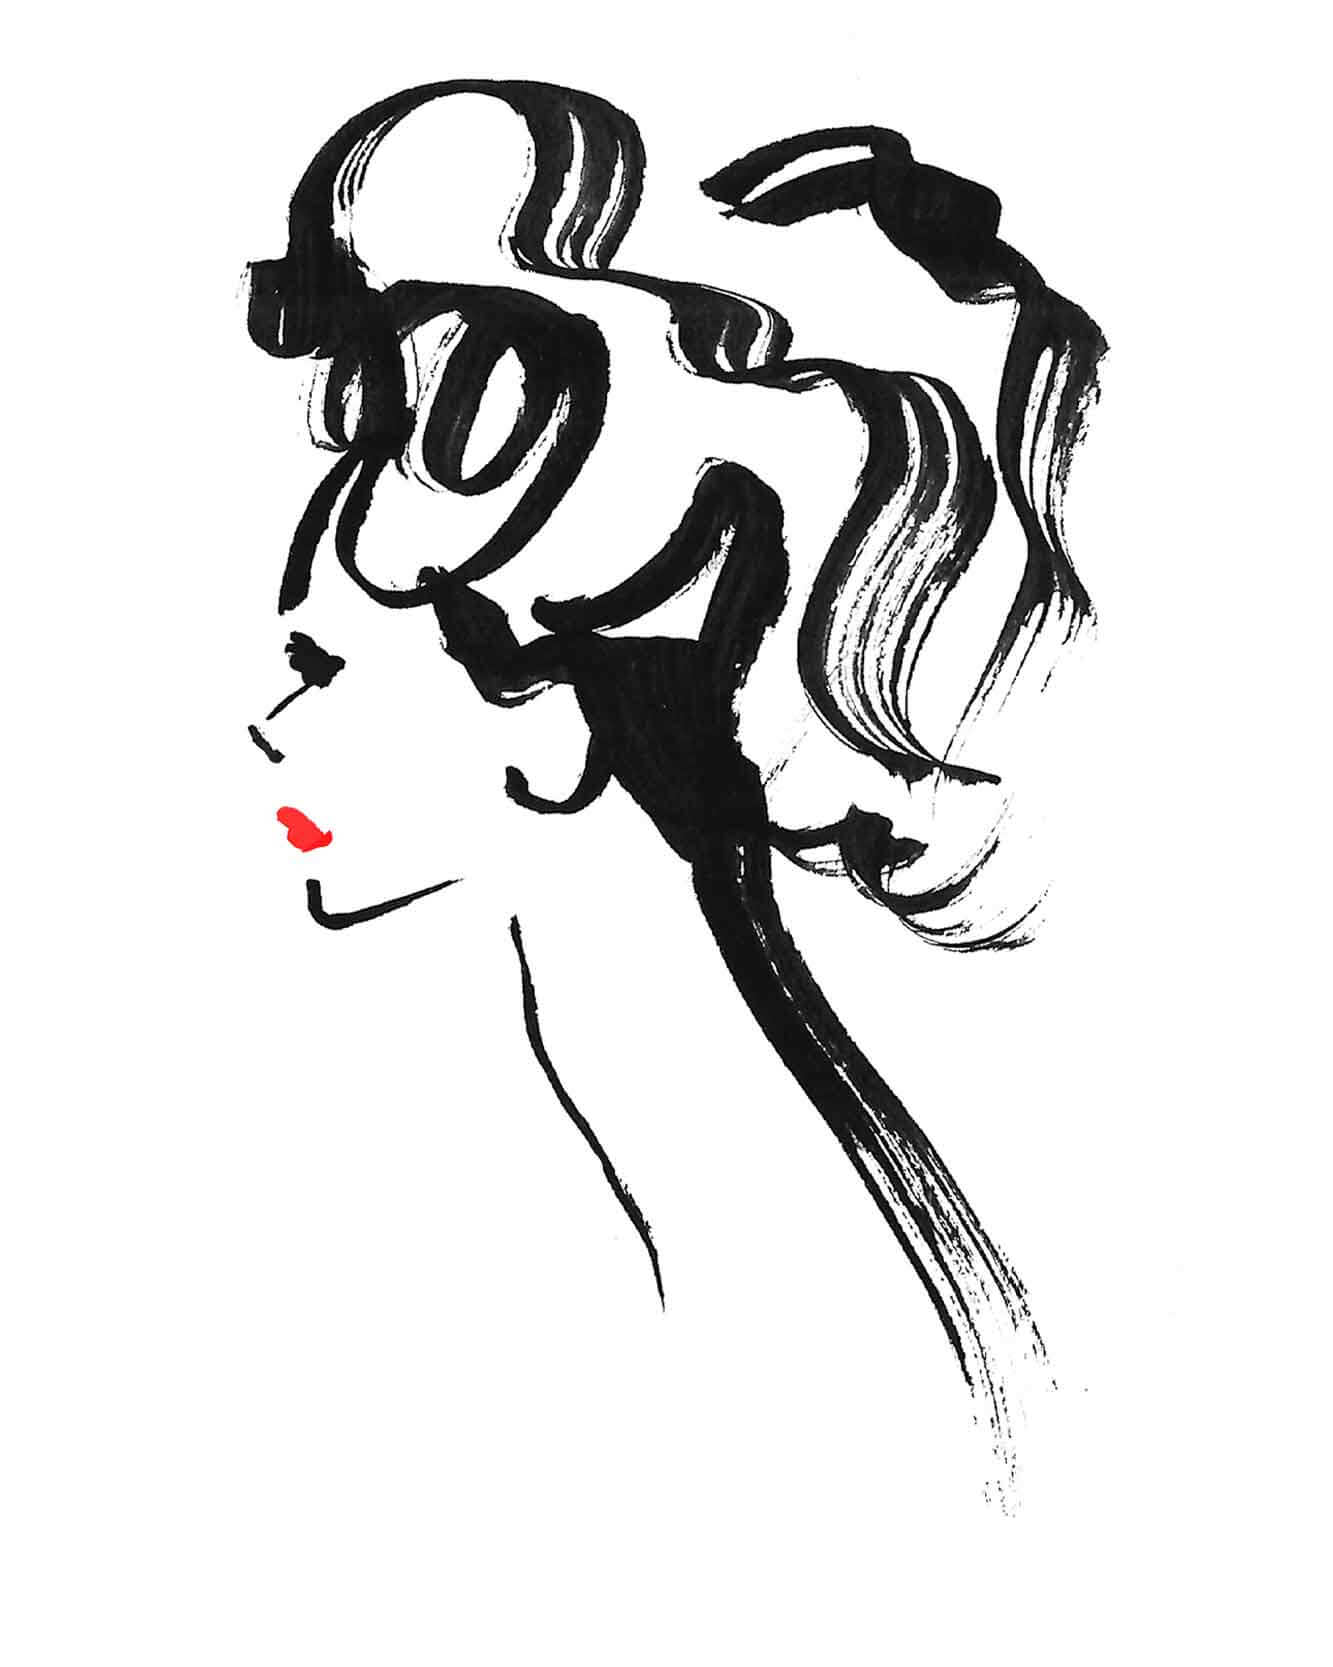 Illustrations for International Women's Day, individual profile drawings. Inky lines fashion illustration inspired illustration. Illustration style of bold black inky brush stroke marks. With simple black ink links and red lipstick.